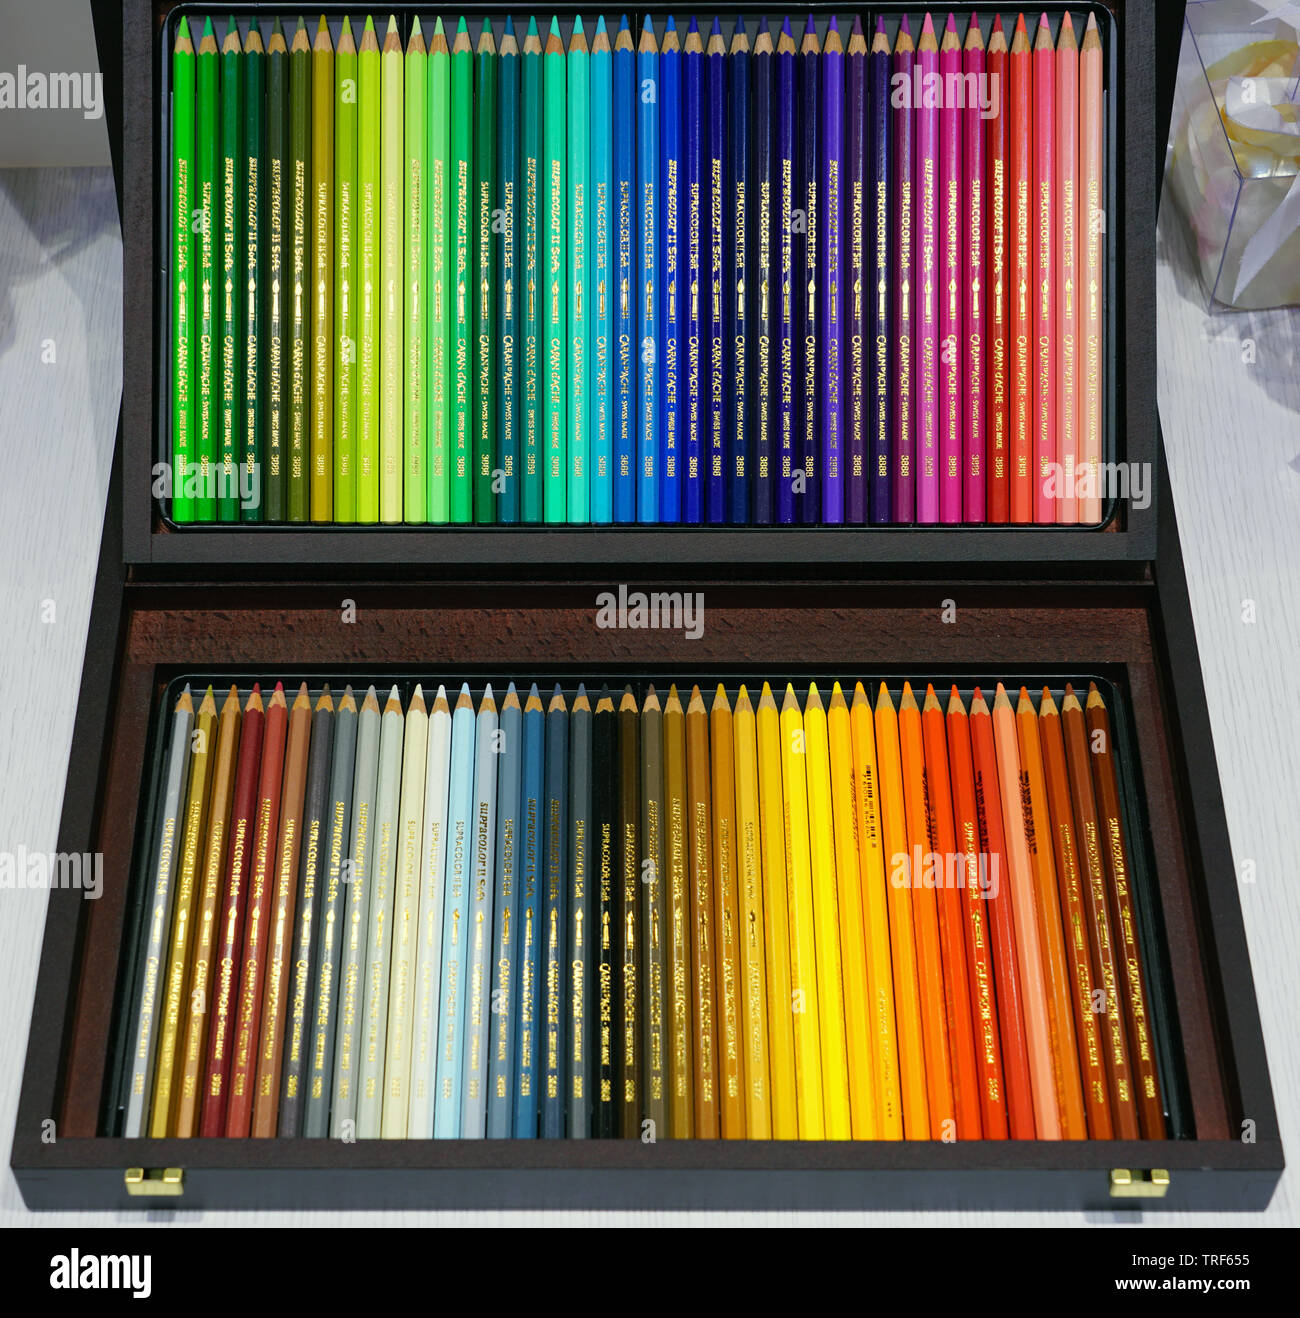 ZURICH, SWITZERLAND -25 MAY 2019- View of a box of assorted colored pencils  by Swiss artist supplies brand Caran d'Ache Stock Photo - Alamy